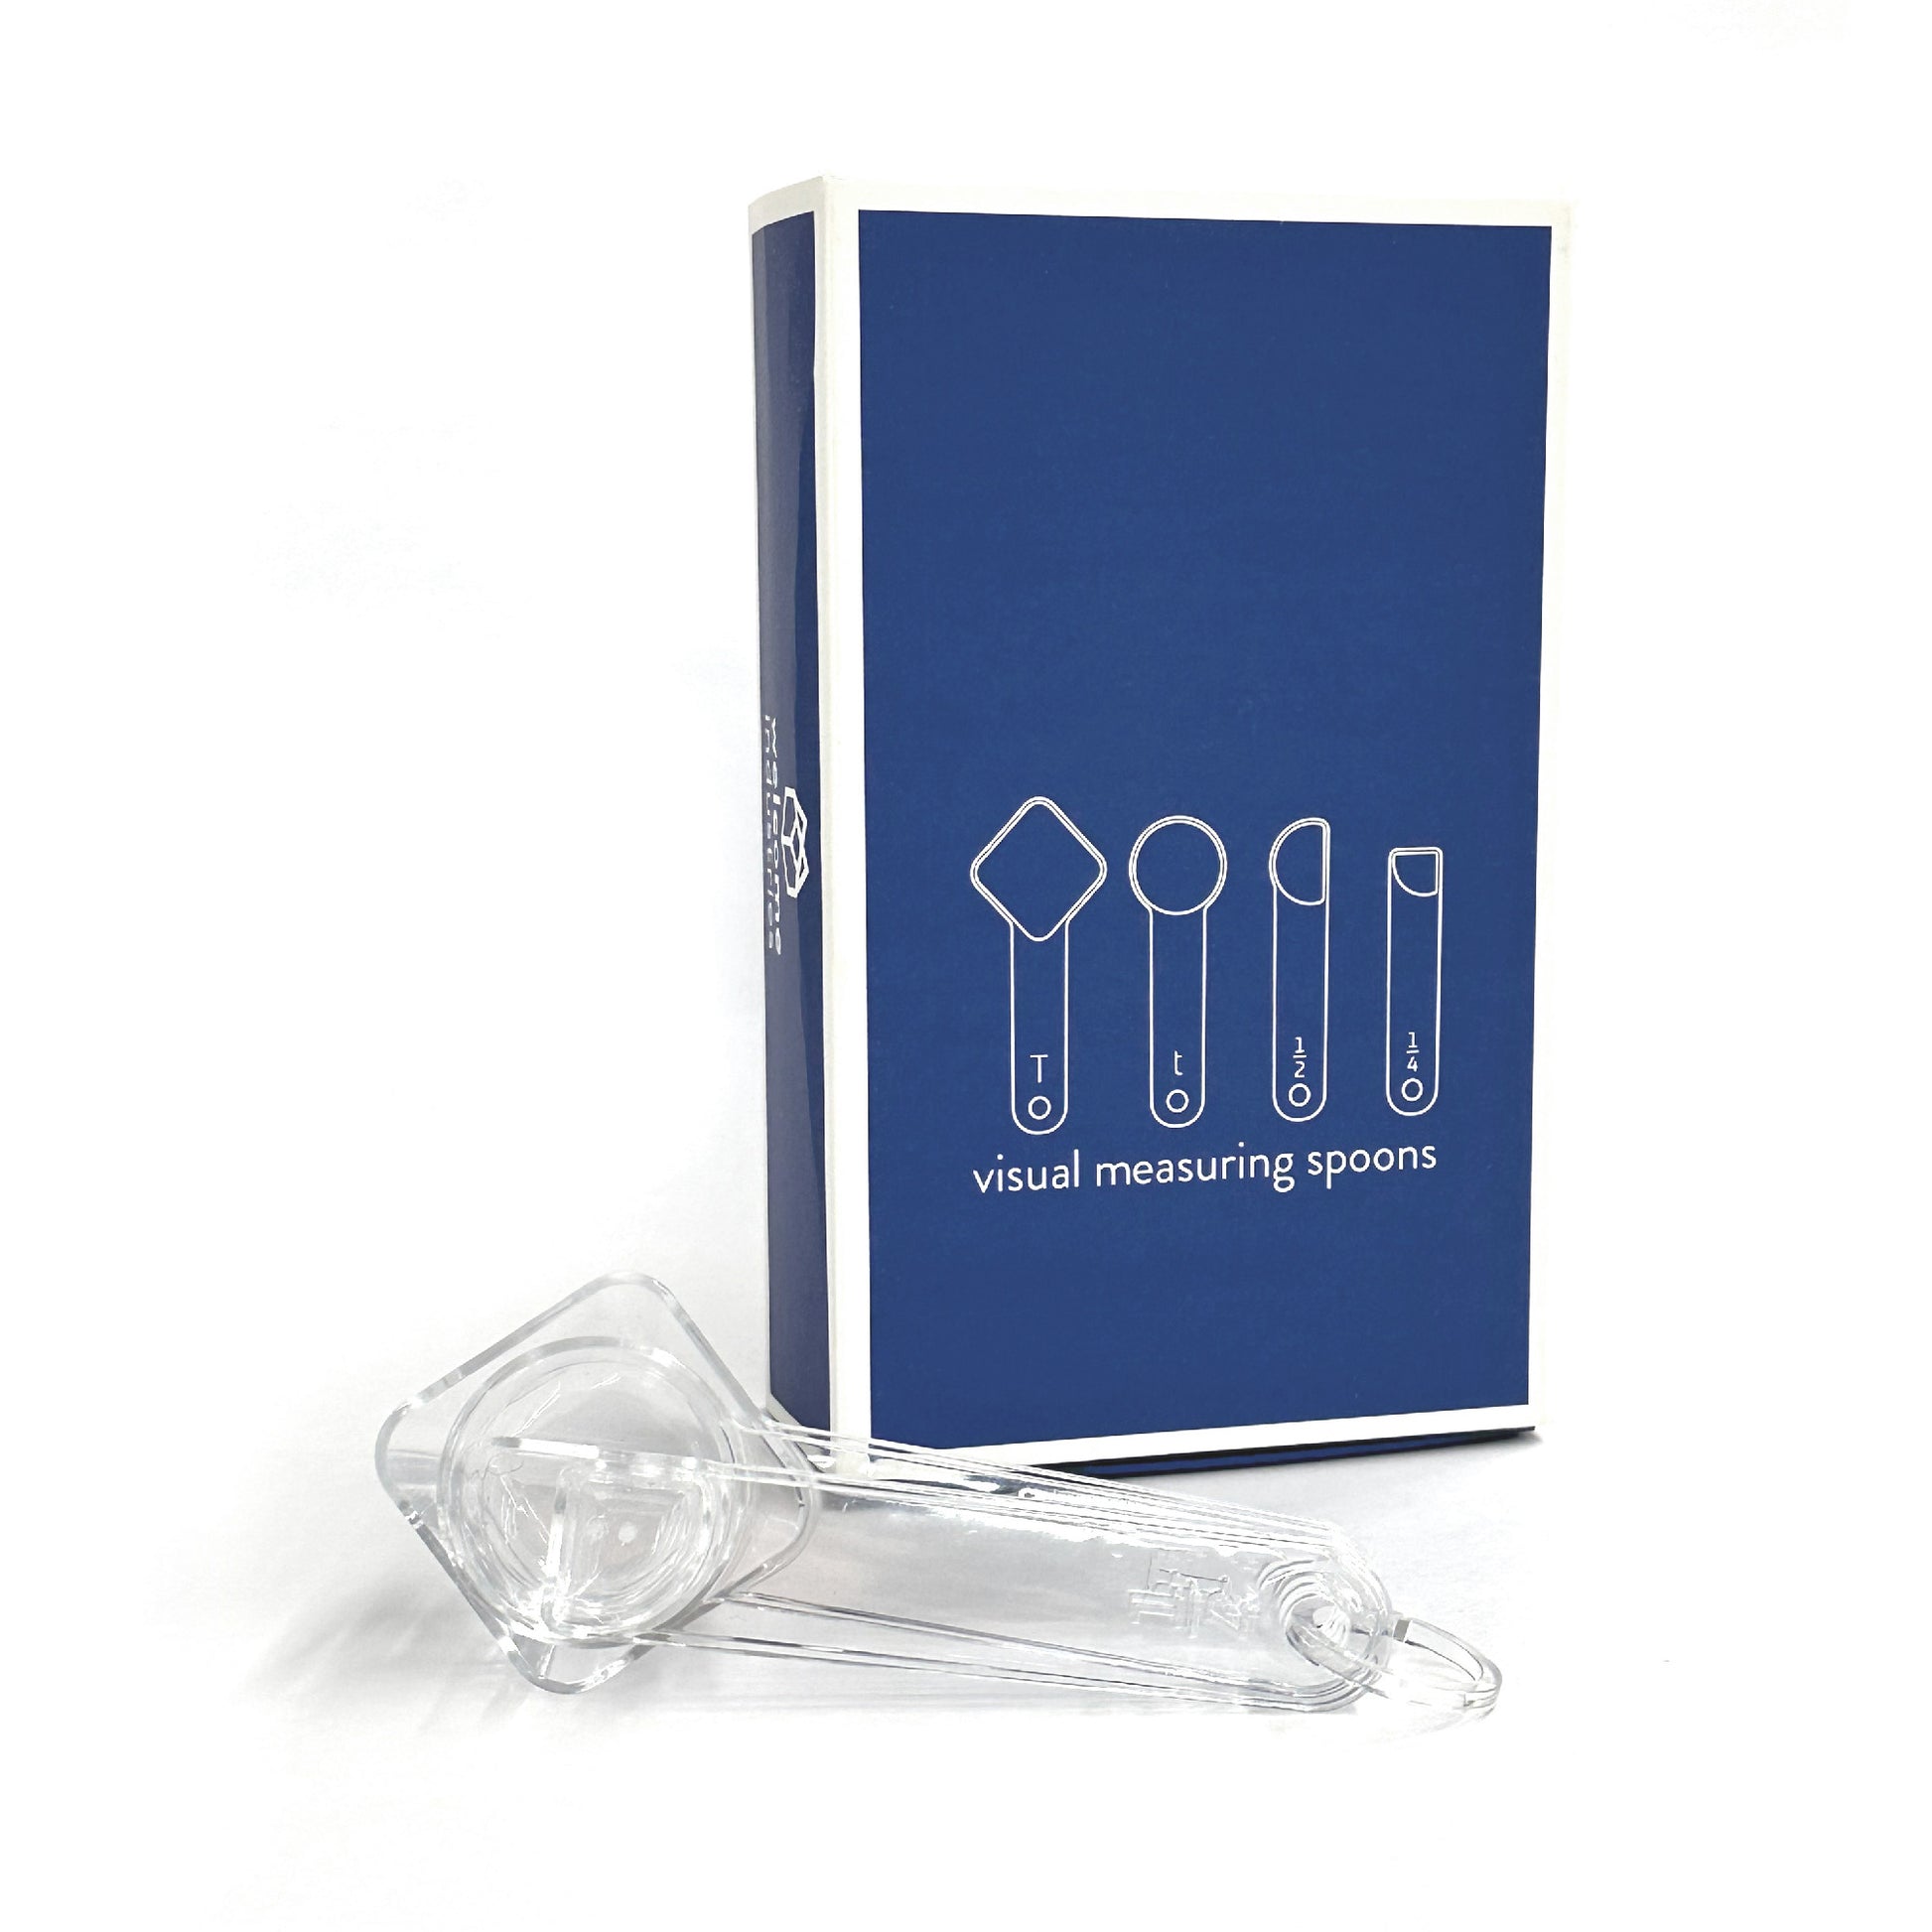 nested visual measuring spoons rest on their side in front of blue gift-box packaging